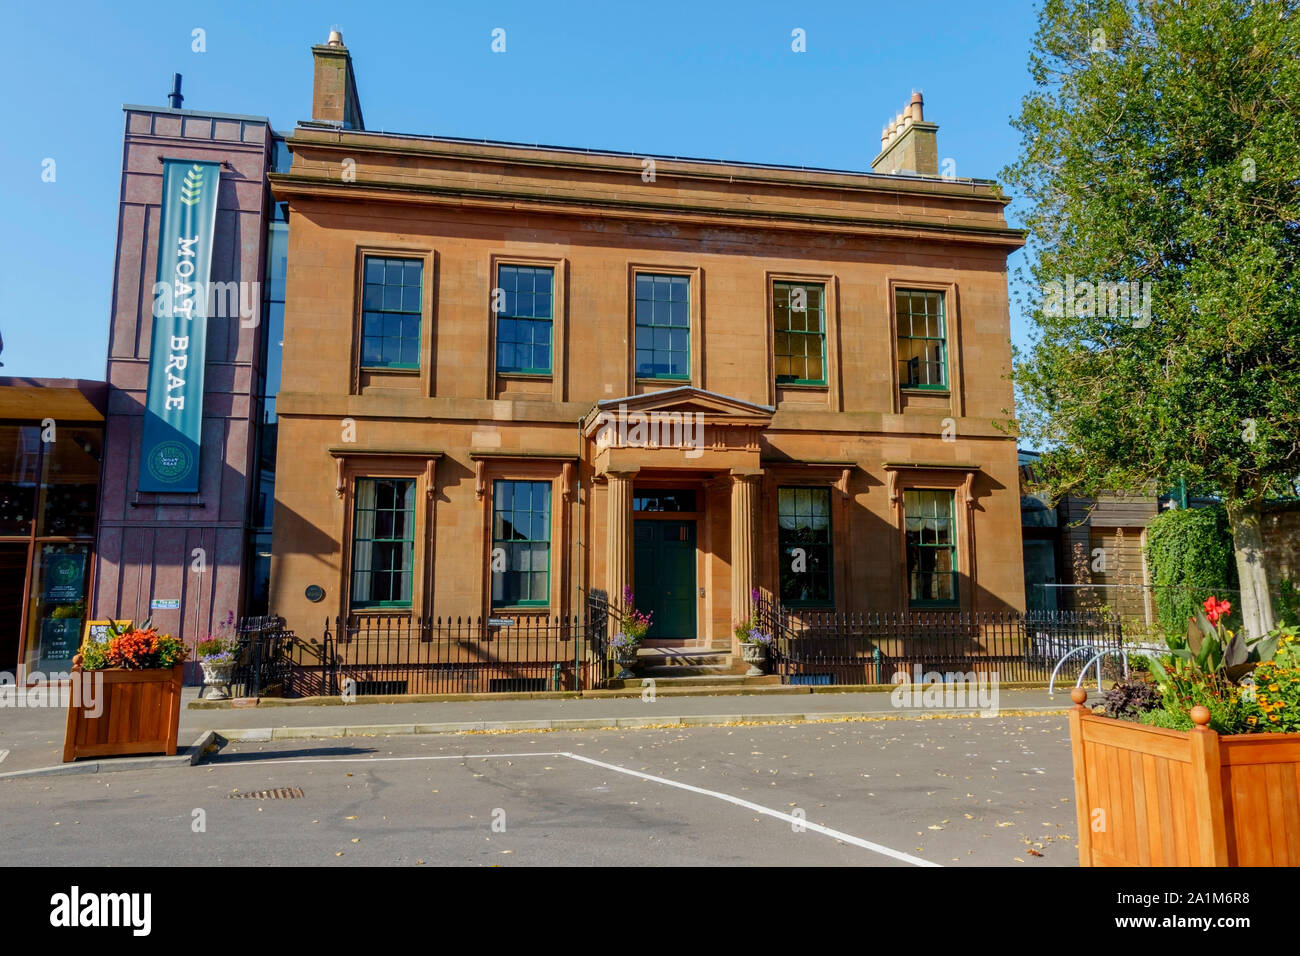 The Moat Brae National Centre for Children’s Literature and Storytelling in Dumfries, South West Scotland. Stock Photo